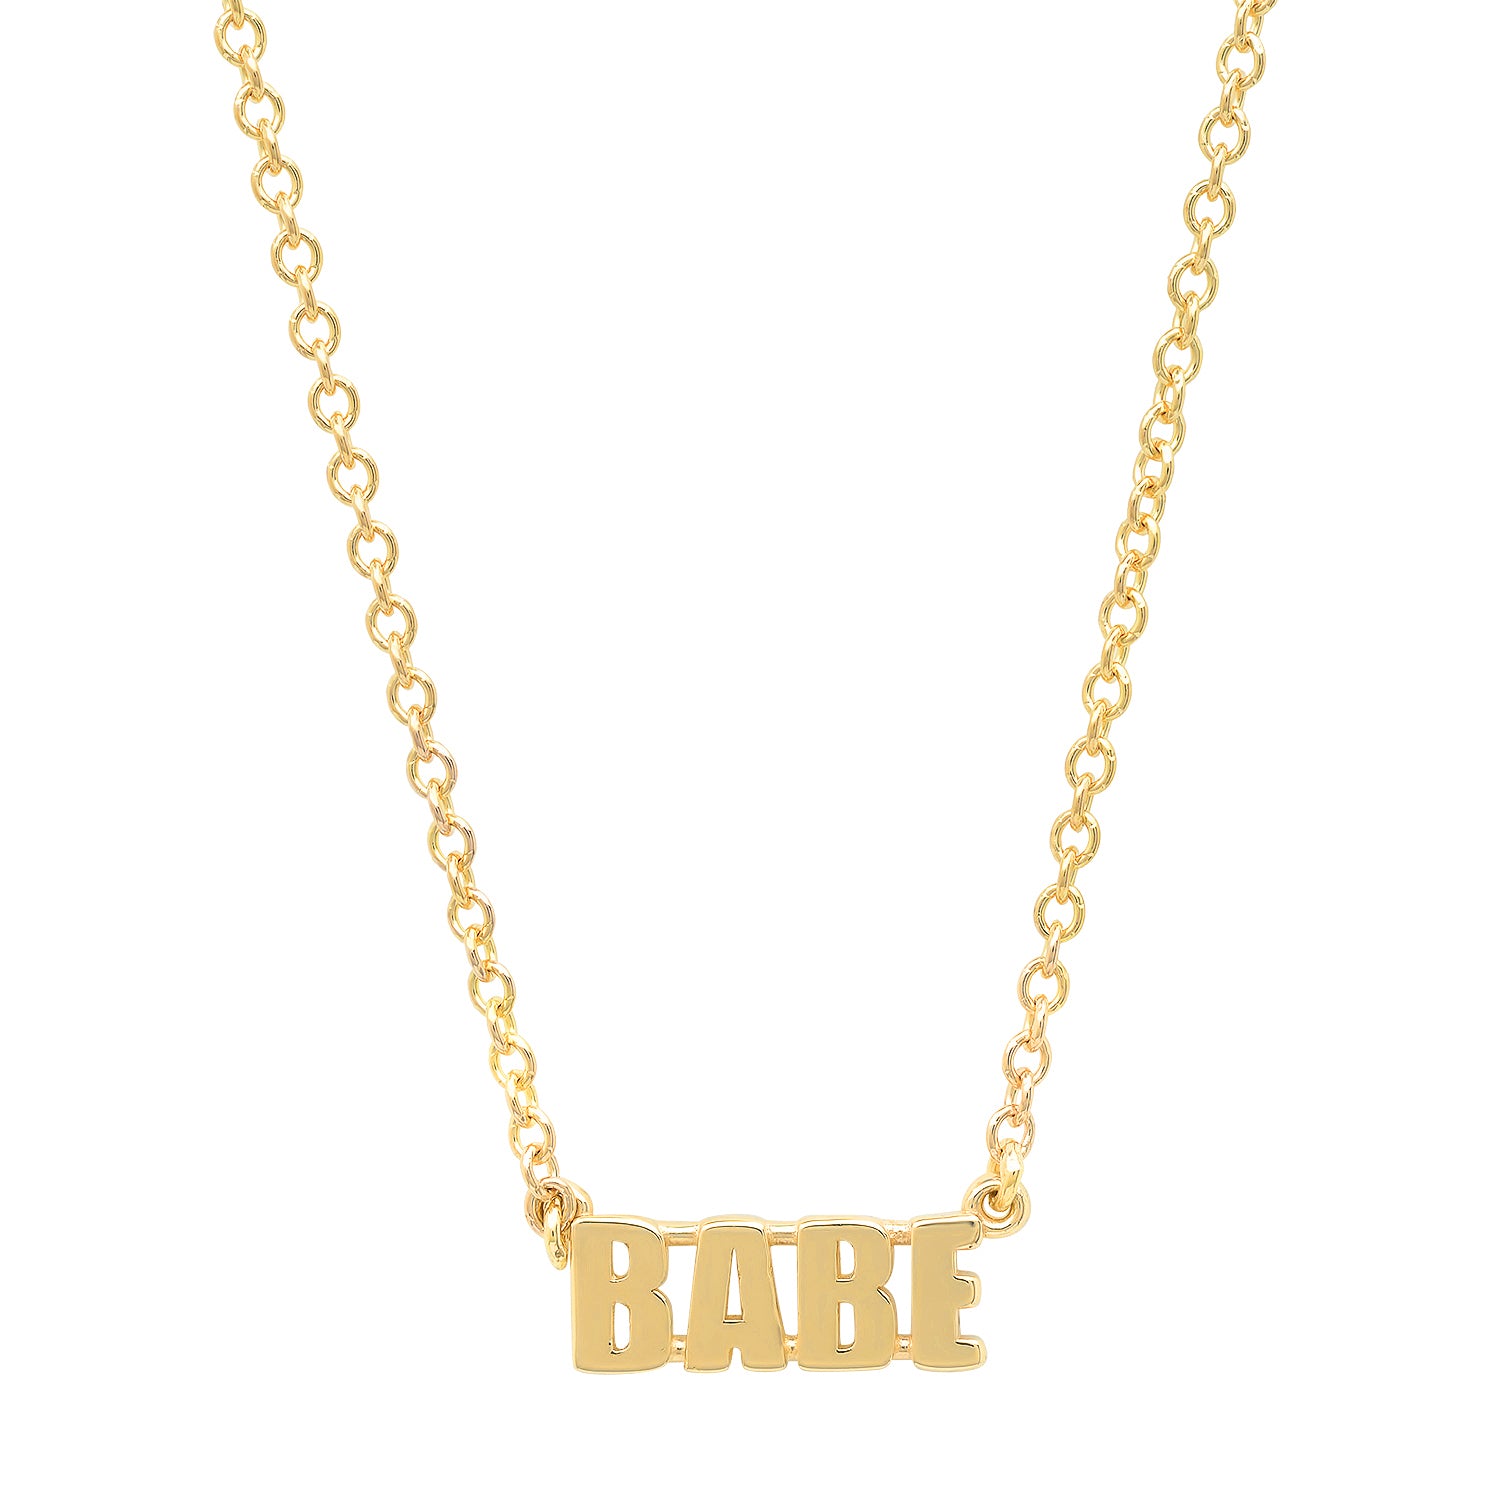 "Babe" Necklace